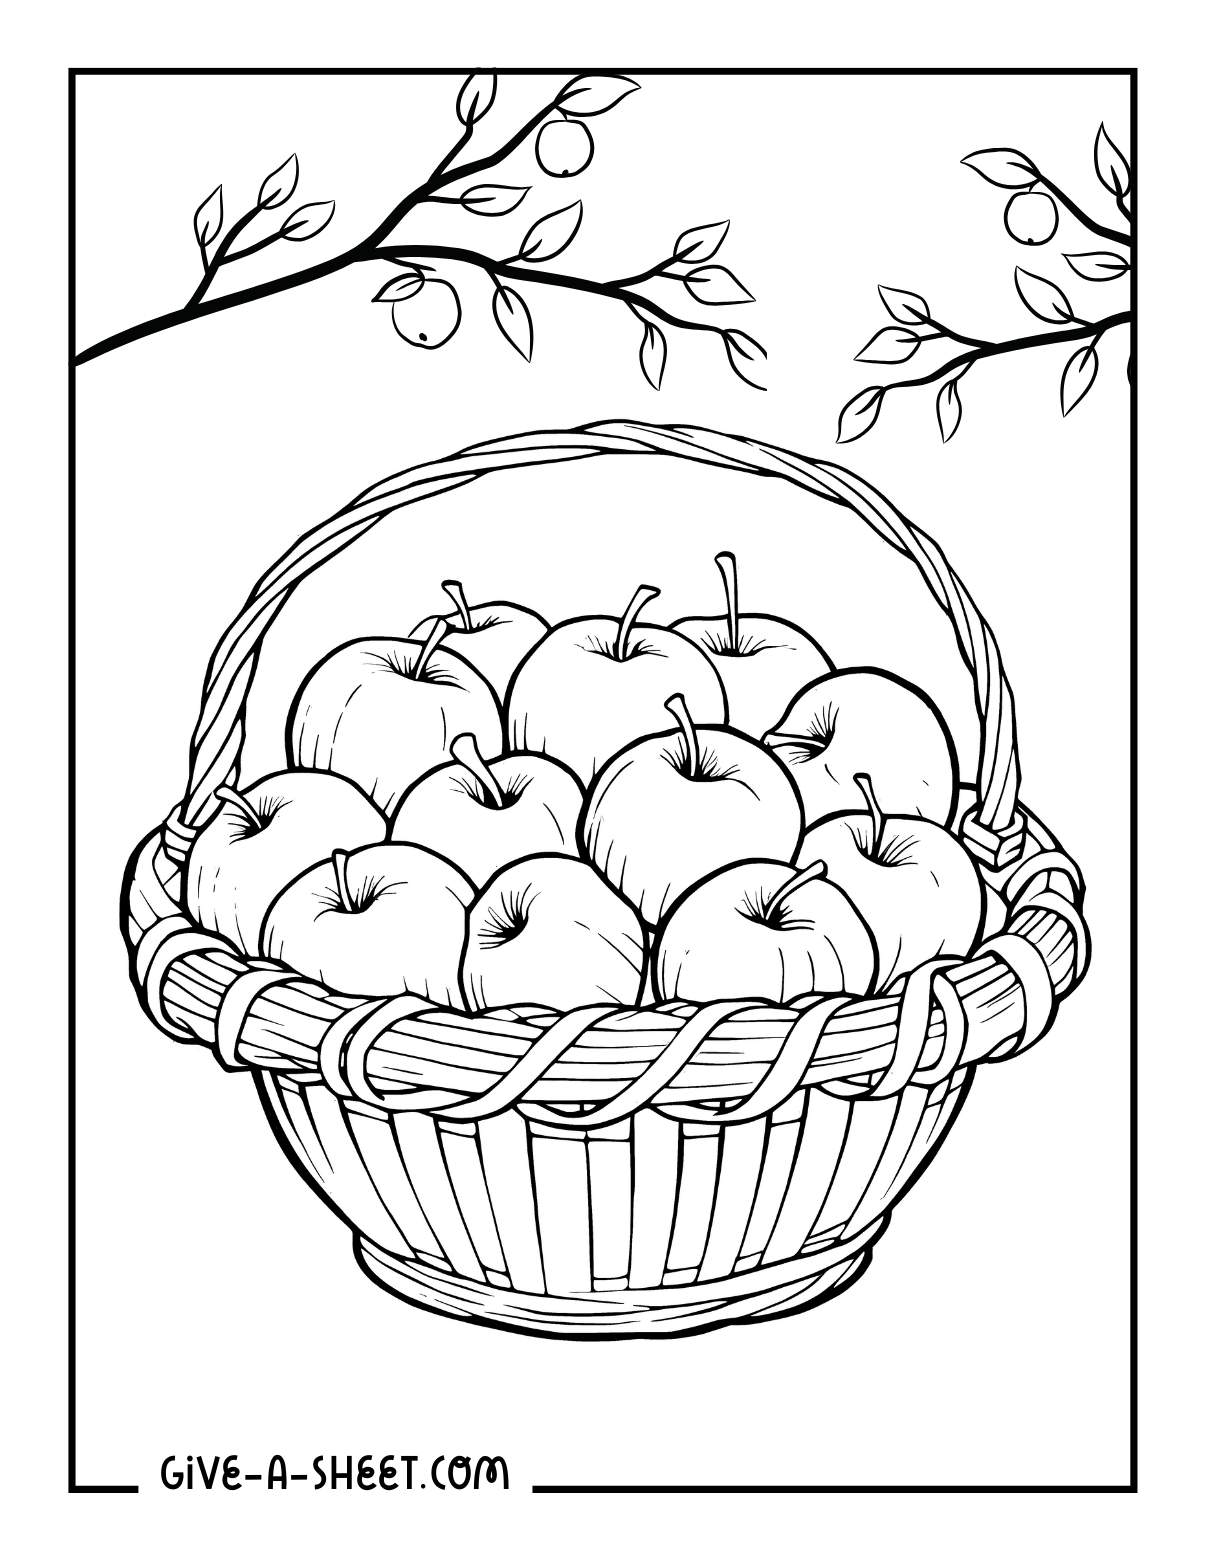 Basket of apples to color in for kids.